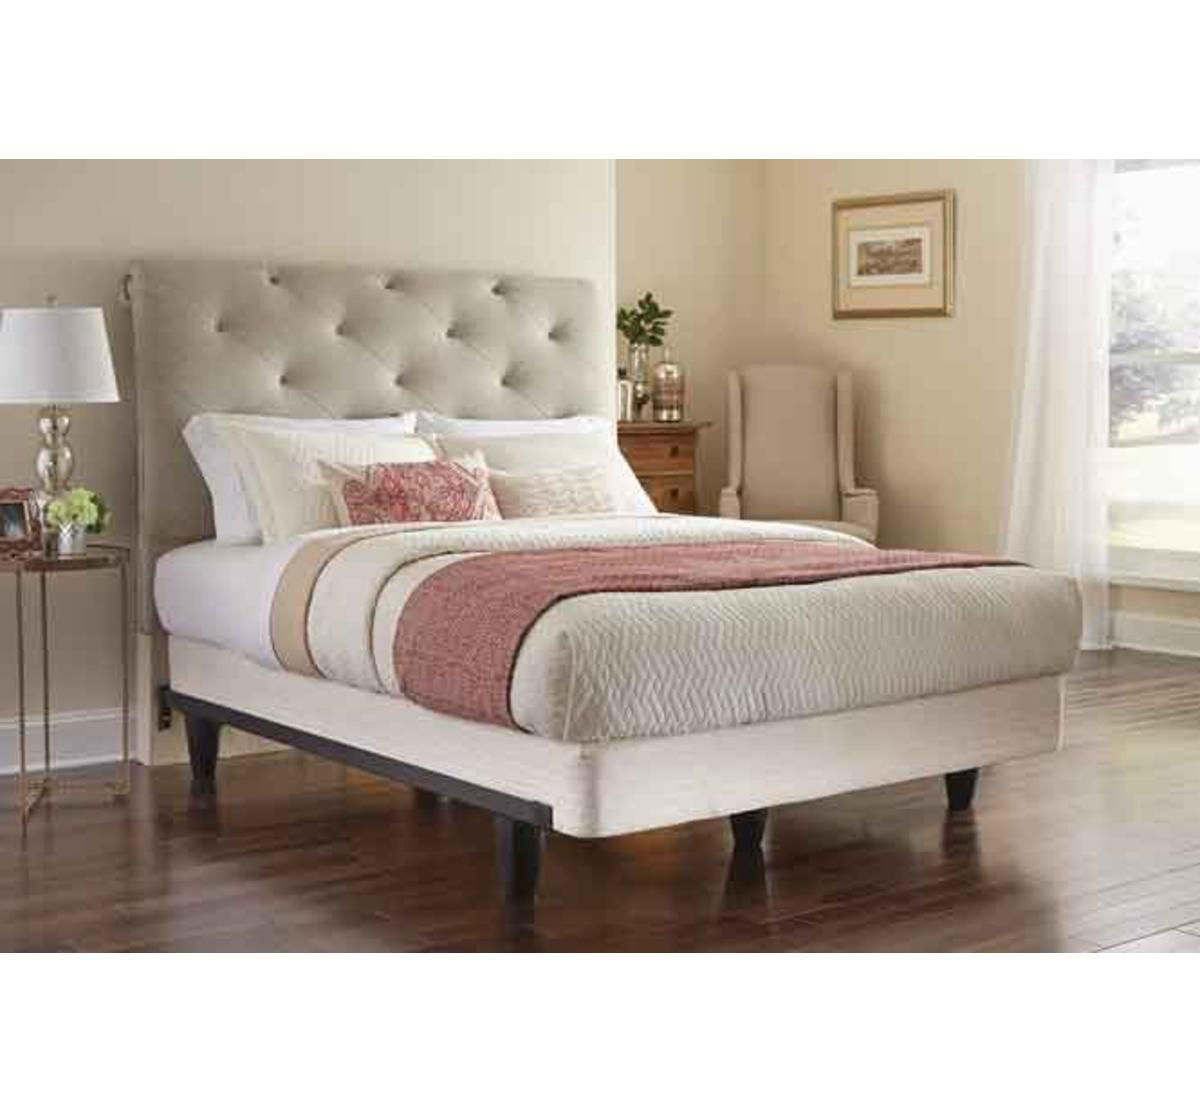 The Engauge Queen Bed Frame Bad, Where To Find Bed Frames